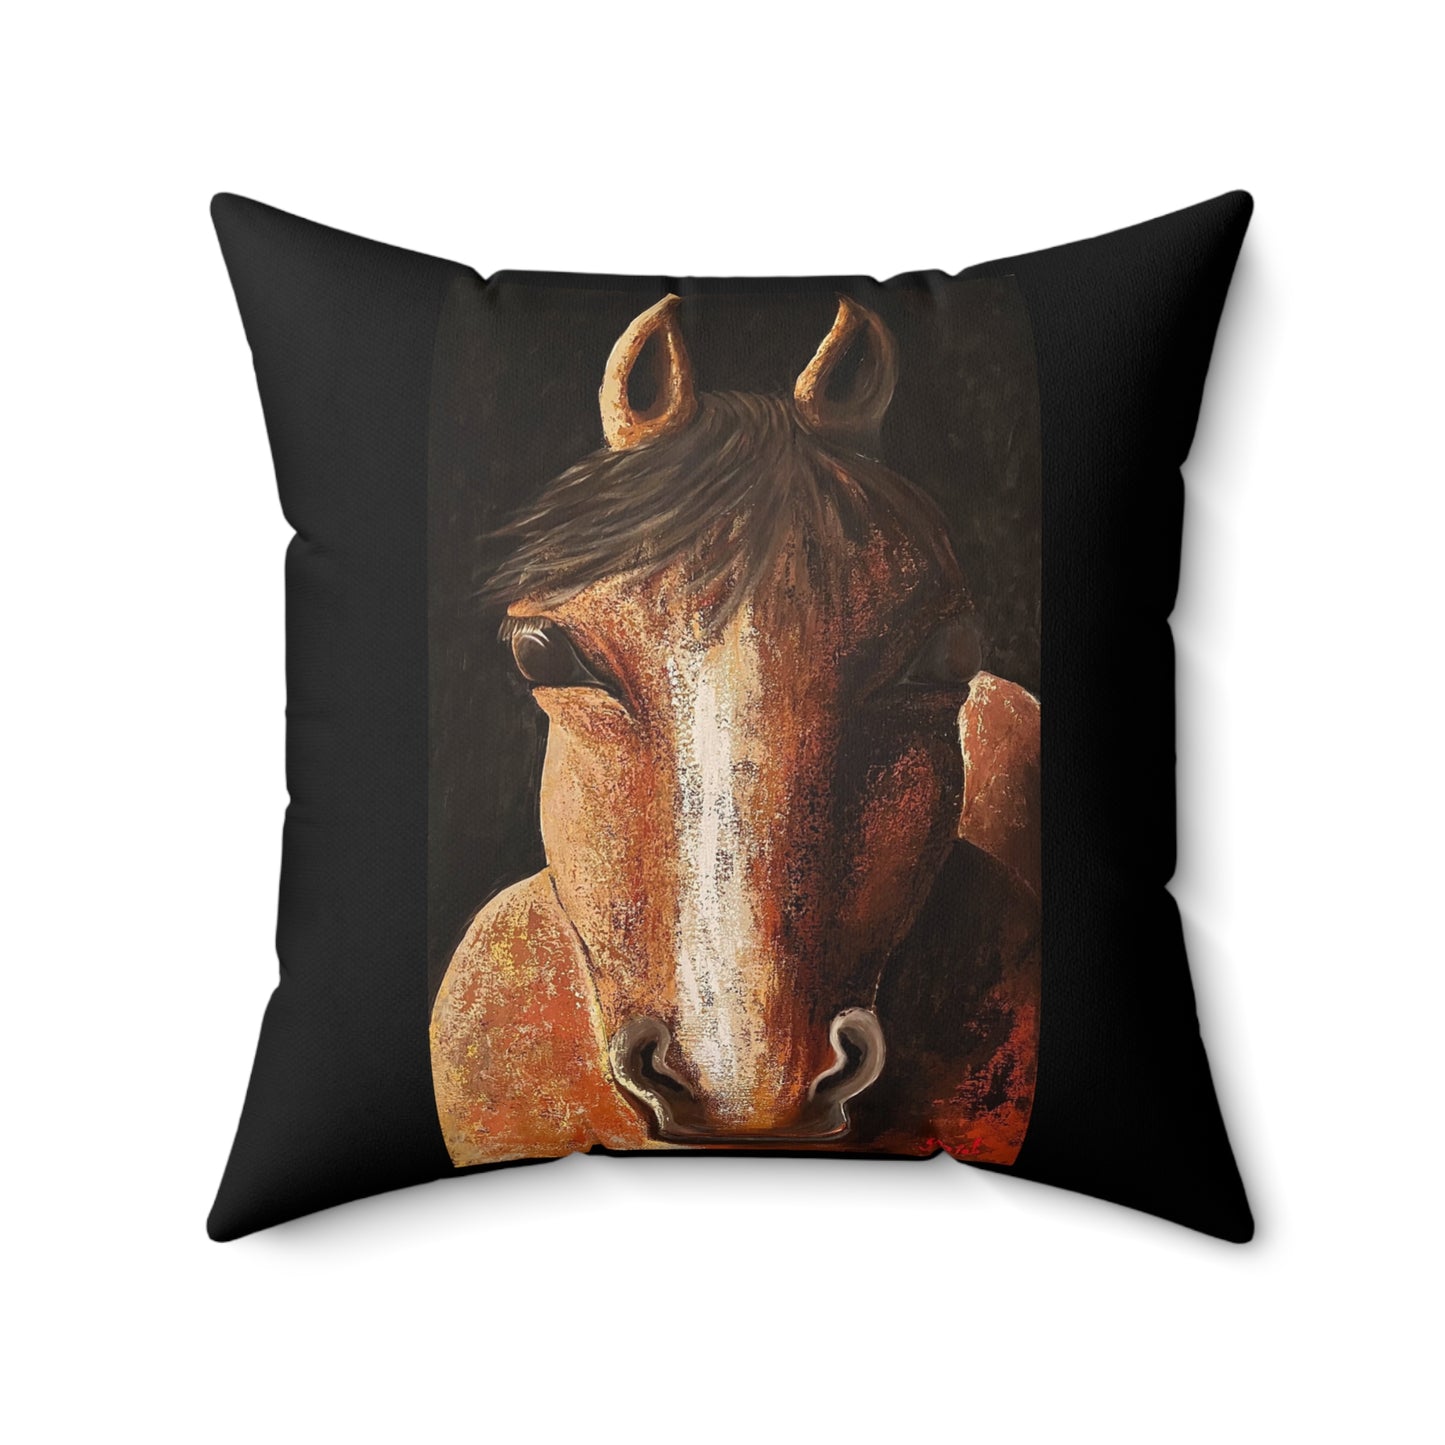 Faux Suede Square Pillow - Nigel Toss Pillow - Horse Throw Pillow